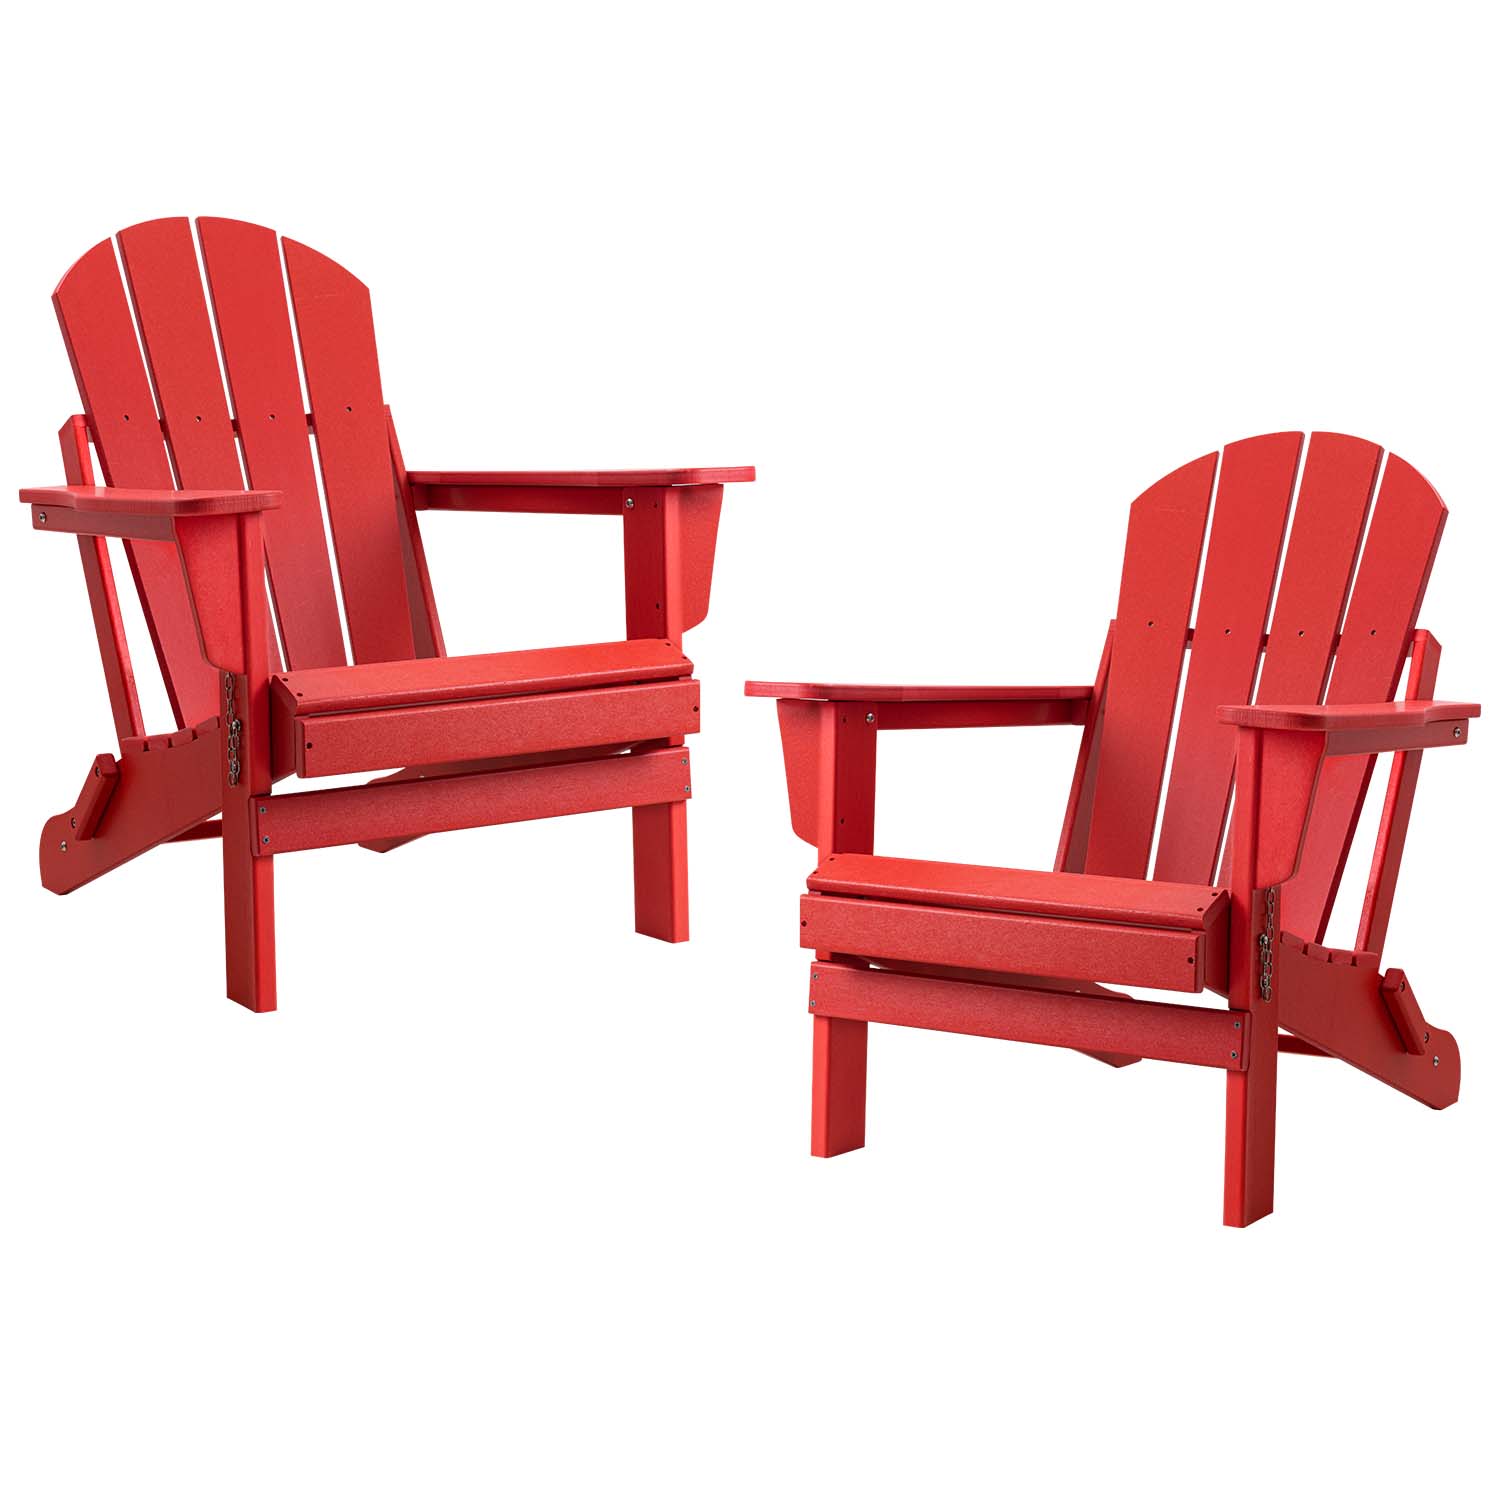 Devoko Folding Adirondack Chair Set of 2 HDPE Weather Resistant Outdoor Lounge Chair, Red - image 2 of 6